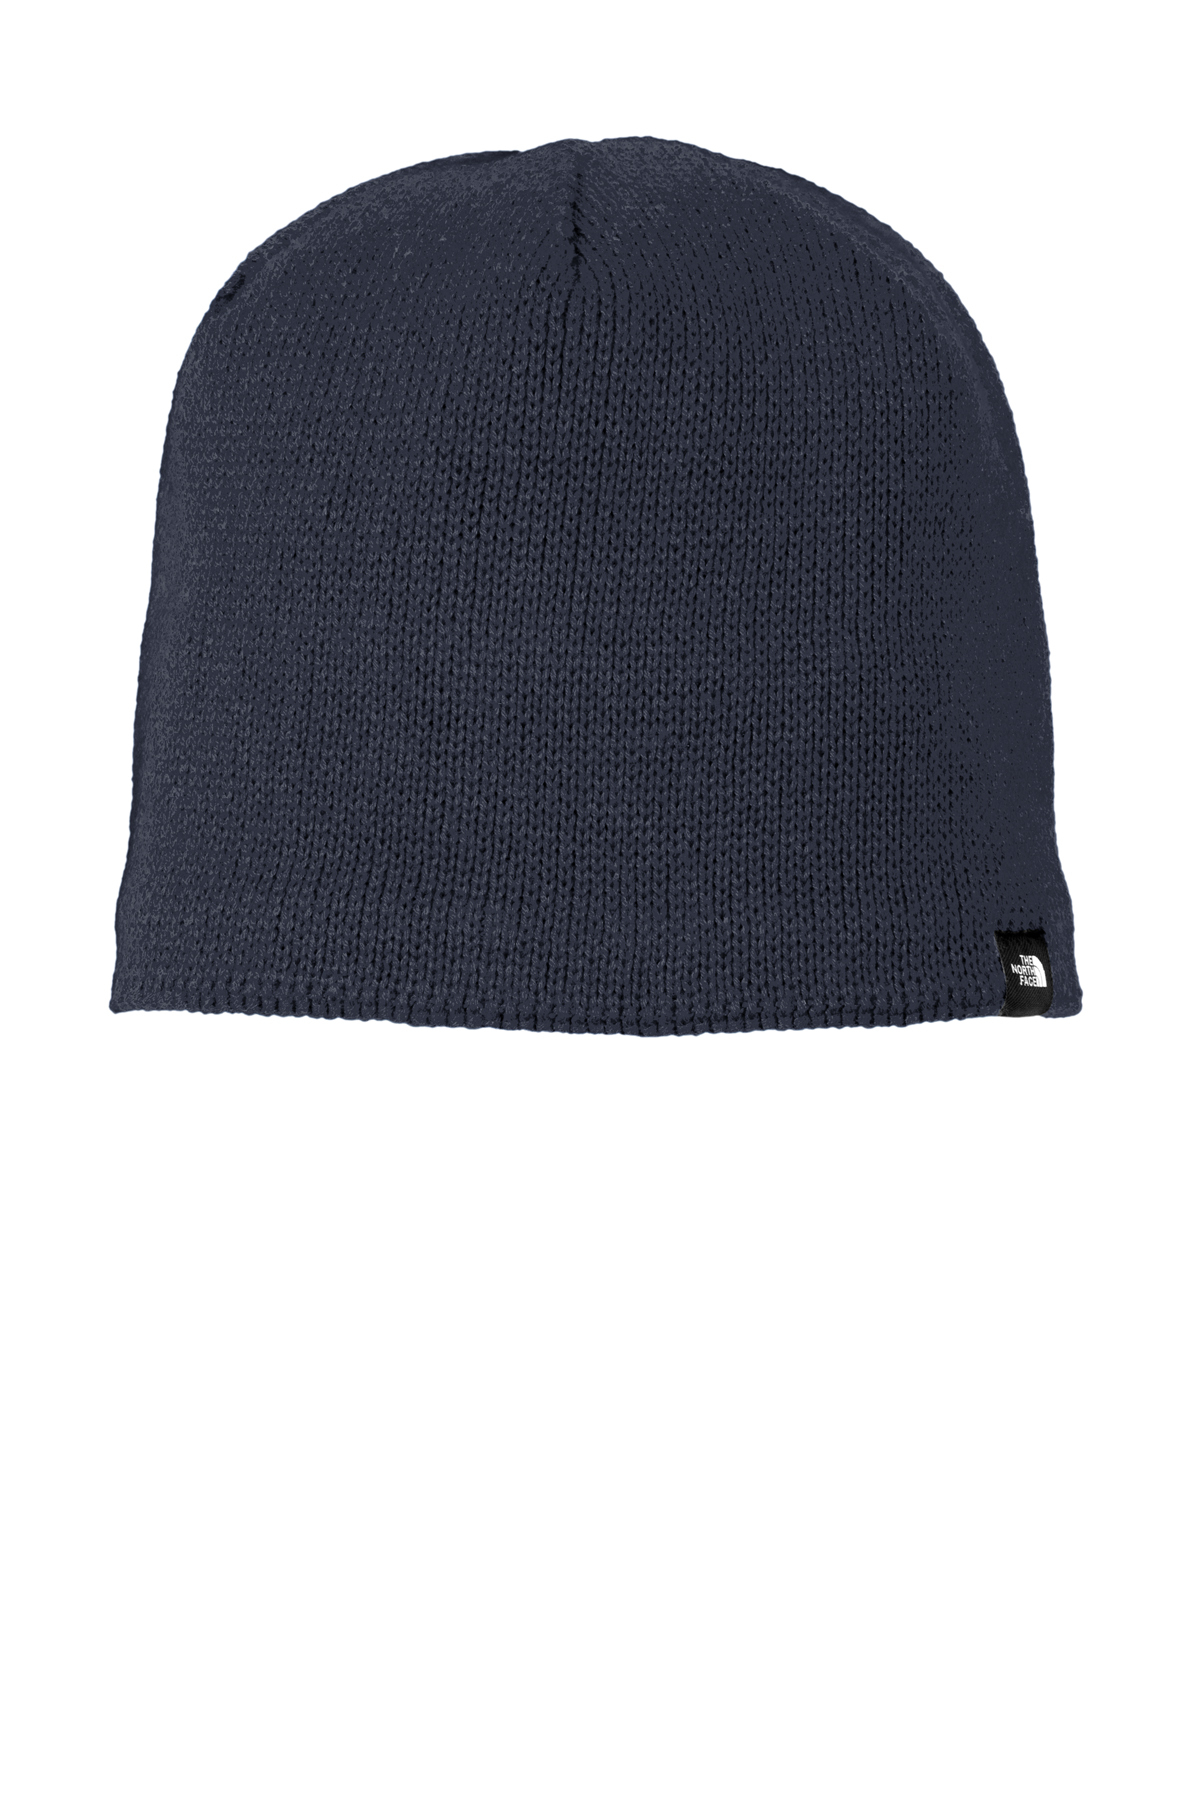 Mountain | North Product The Face | Beanie SanMar